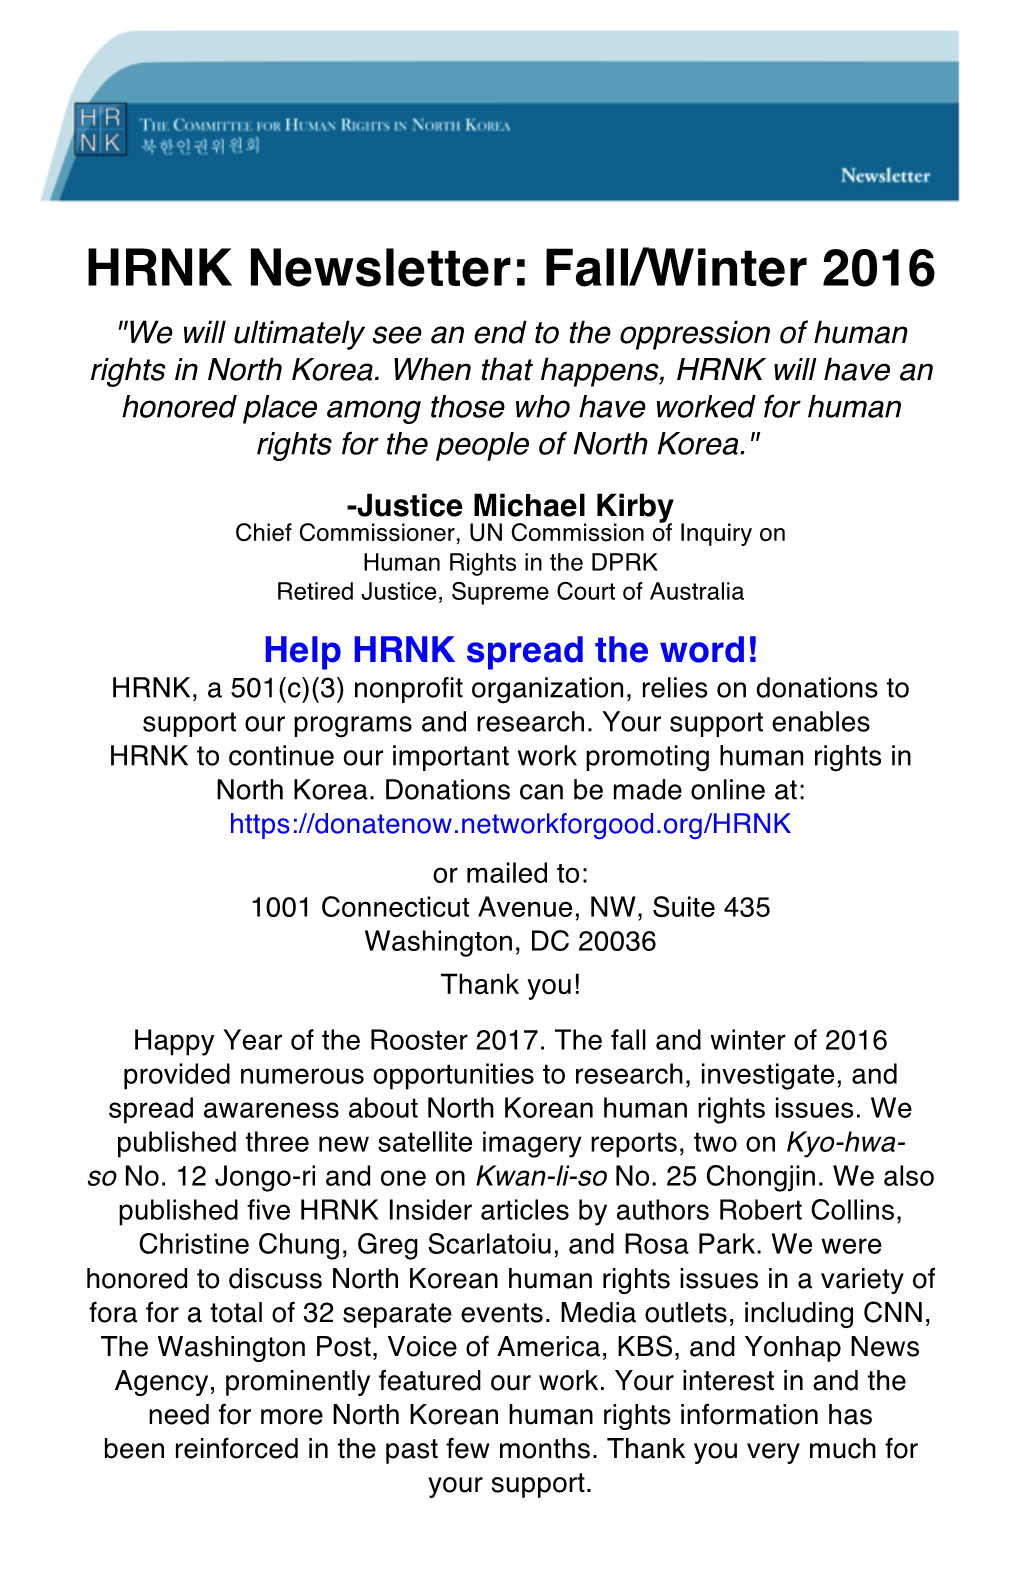 HRNK Newsletter: Fall/Winter 2016 "We Will Ultimately See an End to the Oppression of Human Rights in North Korea